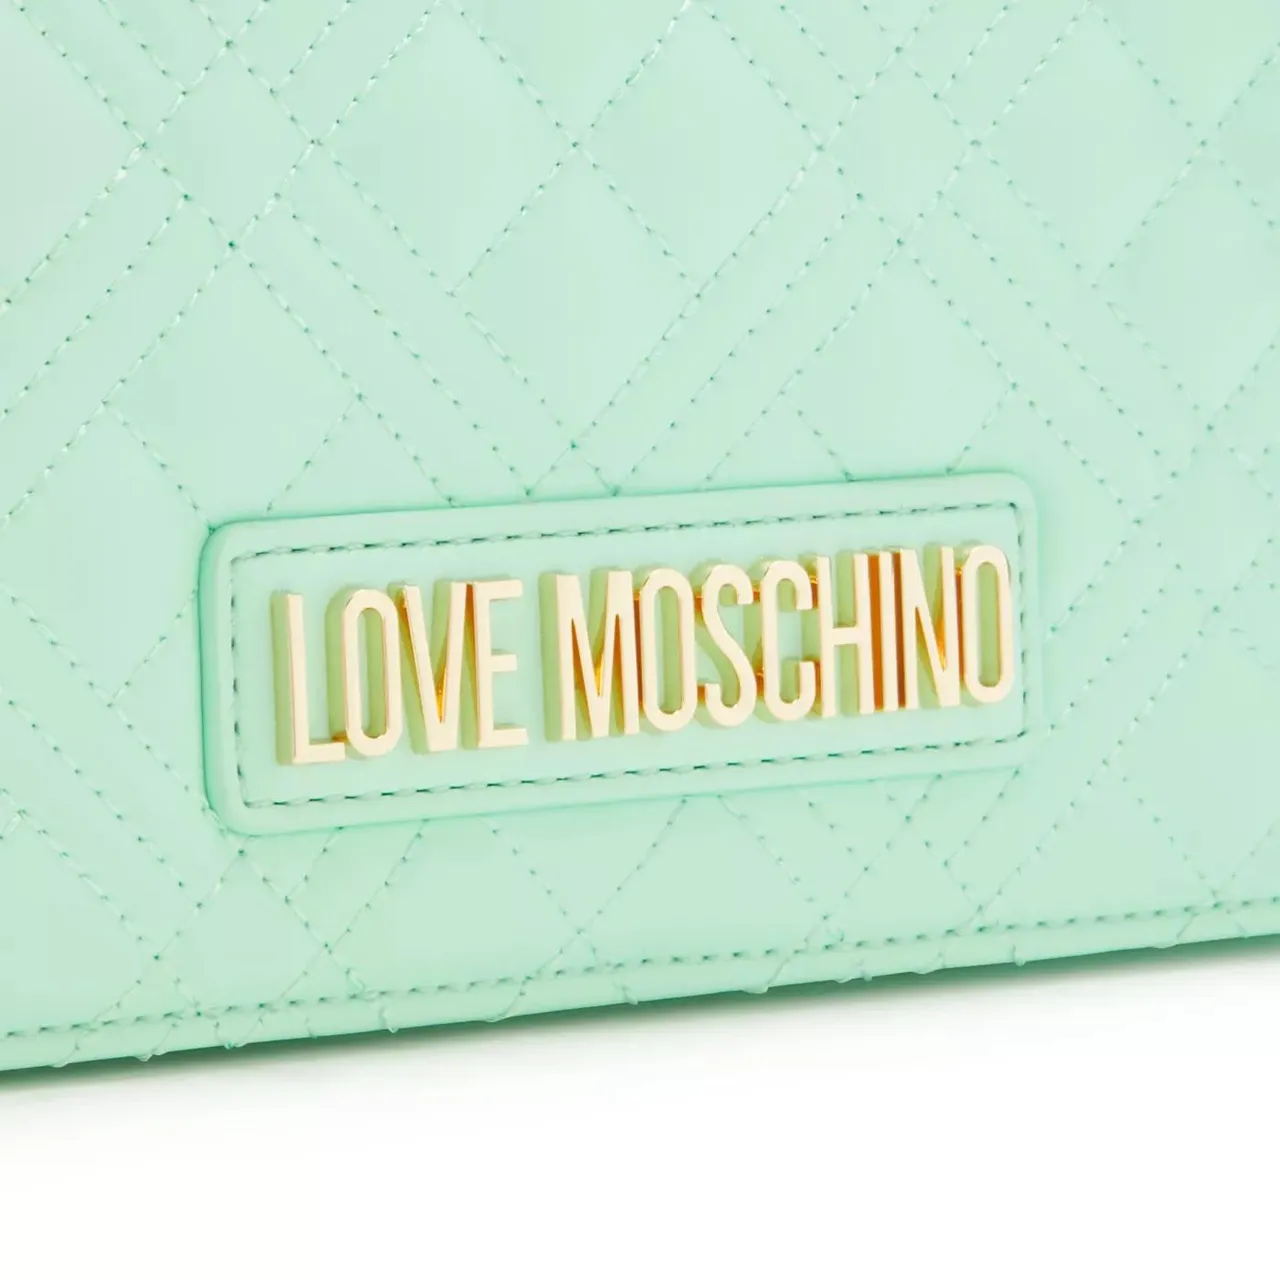 Love Moschino Crossbody Bags - Love Moschino Quilted Bag Grüne Schultertasche JC4 - green - Crossbody Bags for ladies